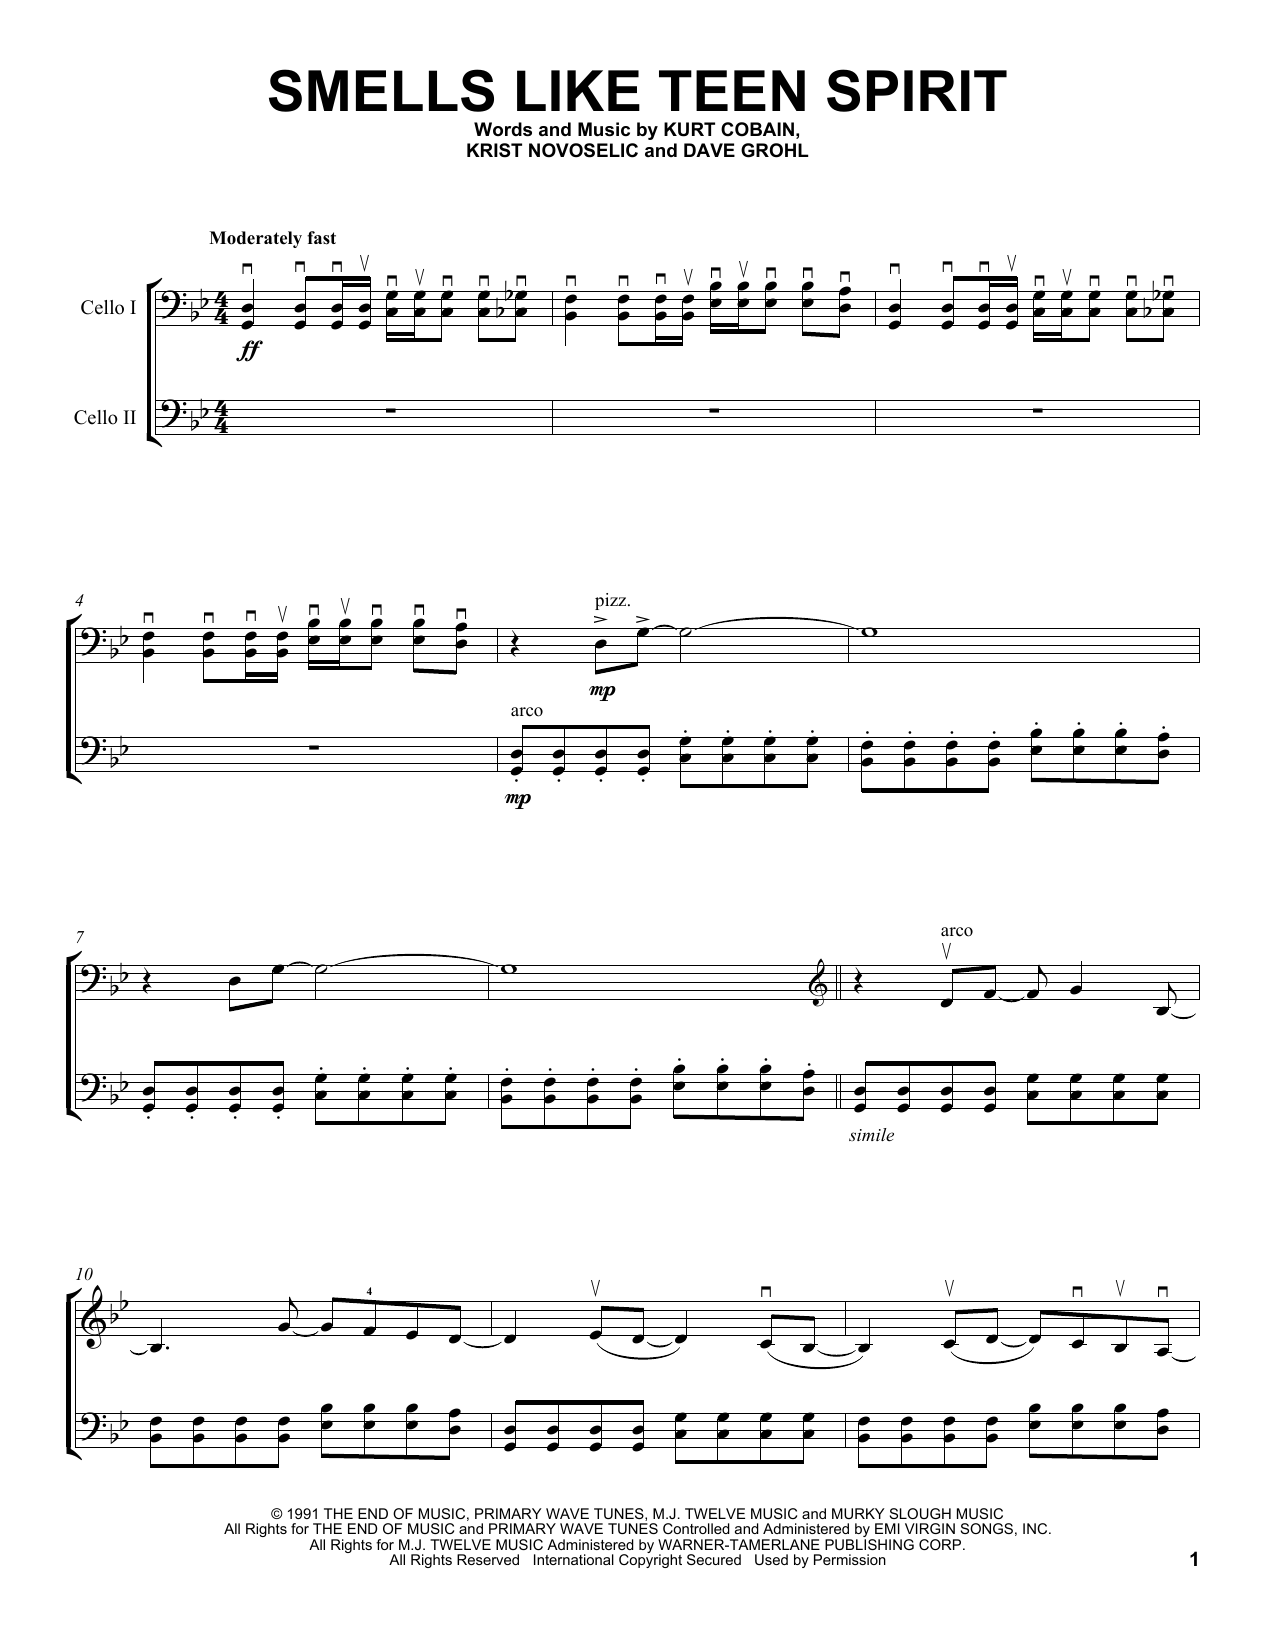 2Cellos Smells Like Teen Spirit sheet music notes and chords. Download Printable PDF.